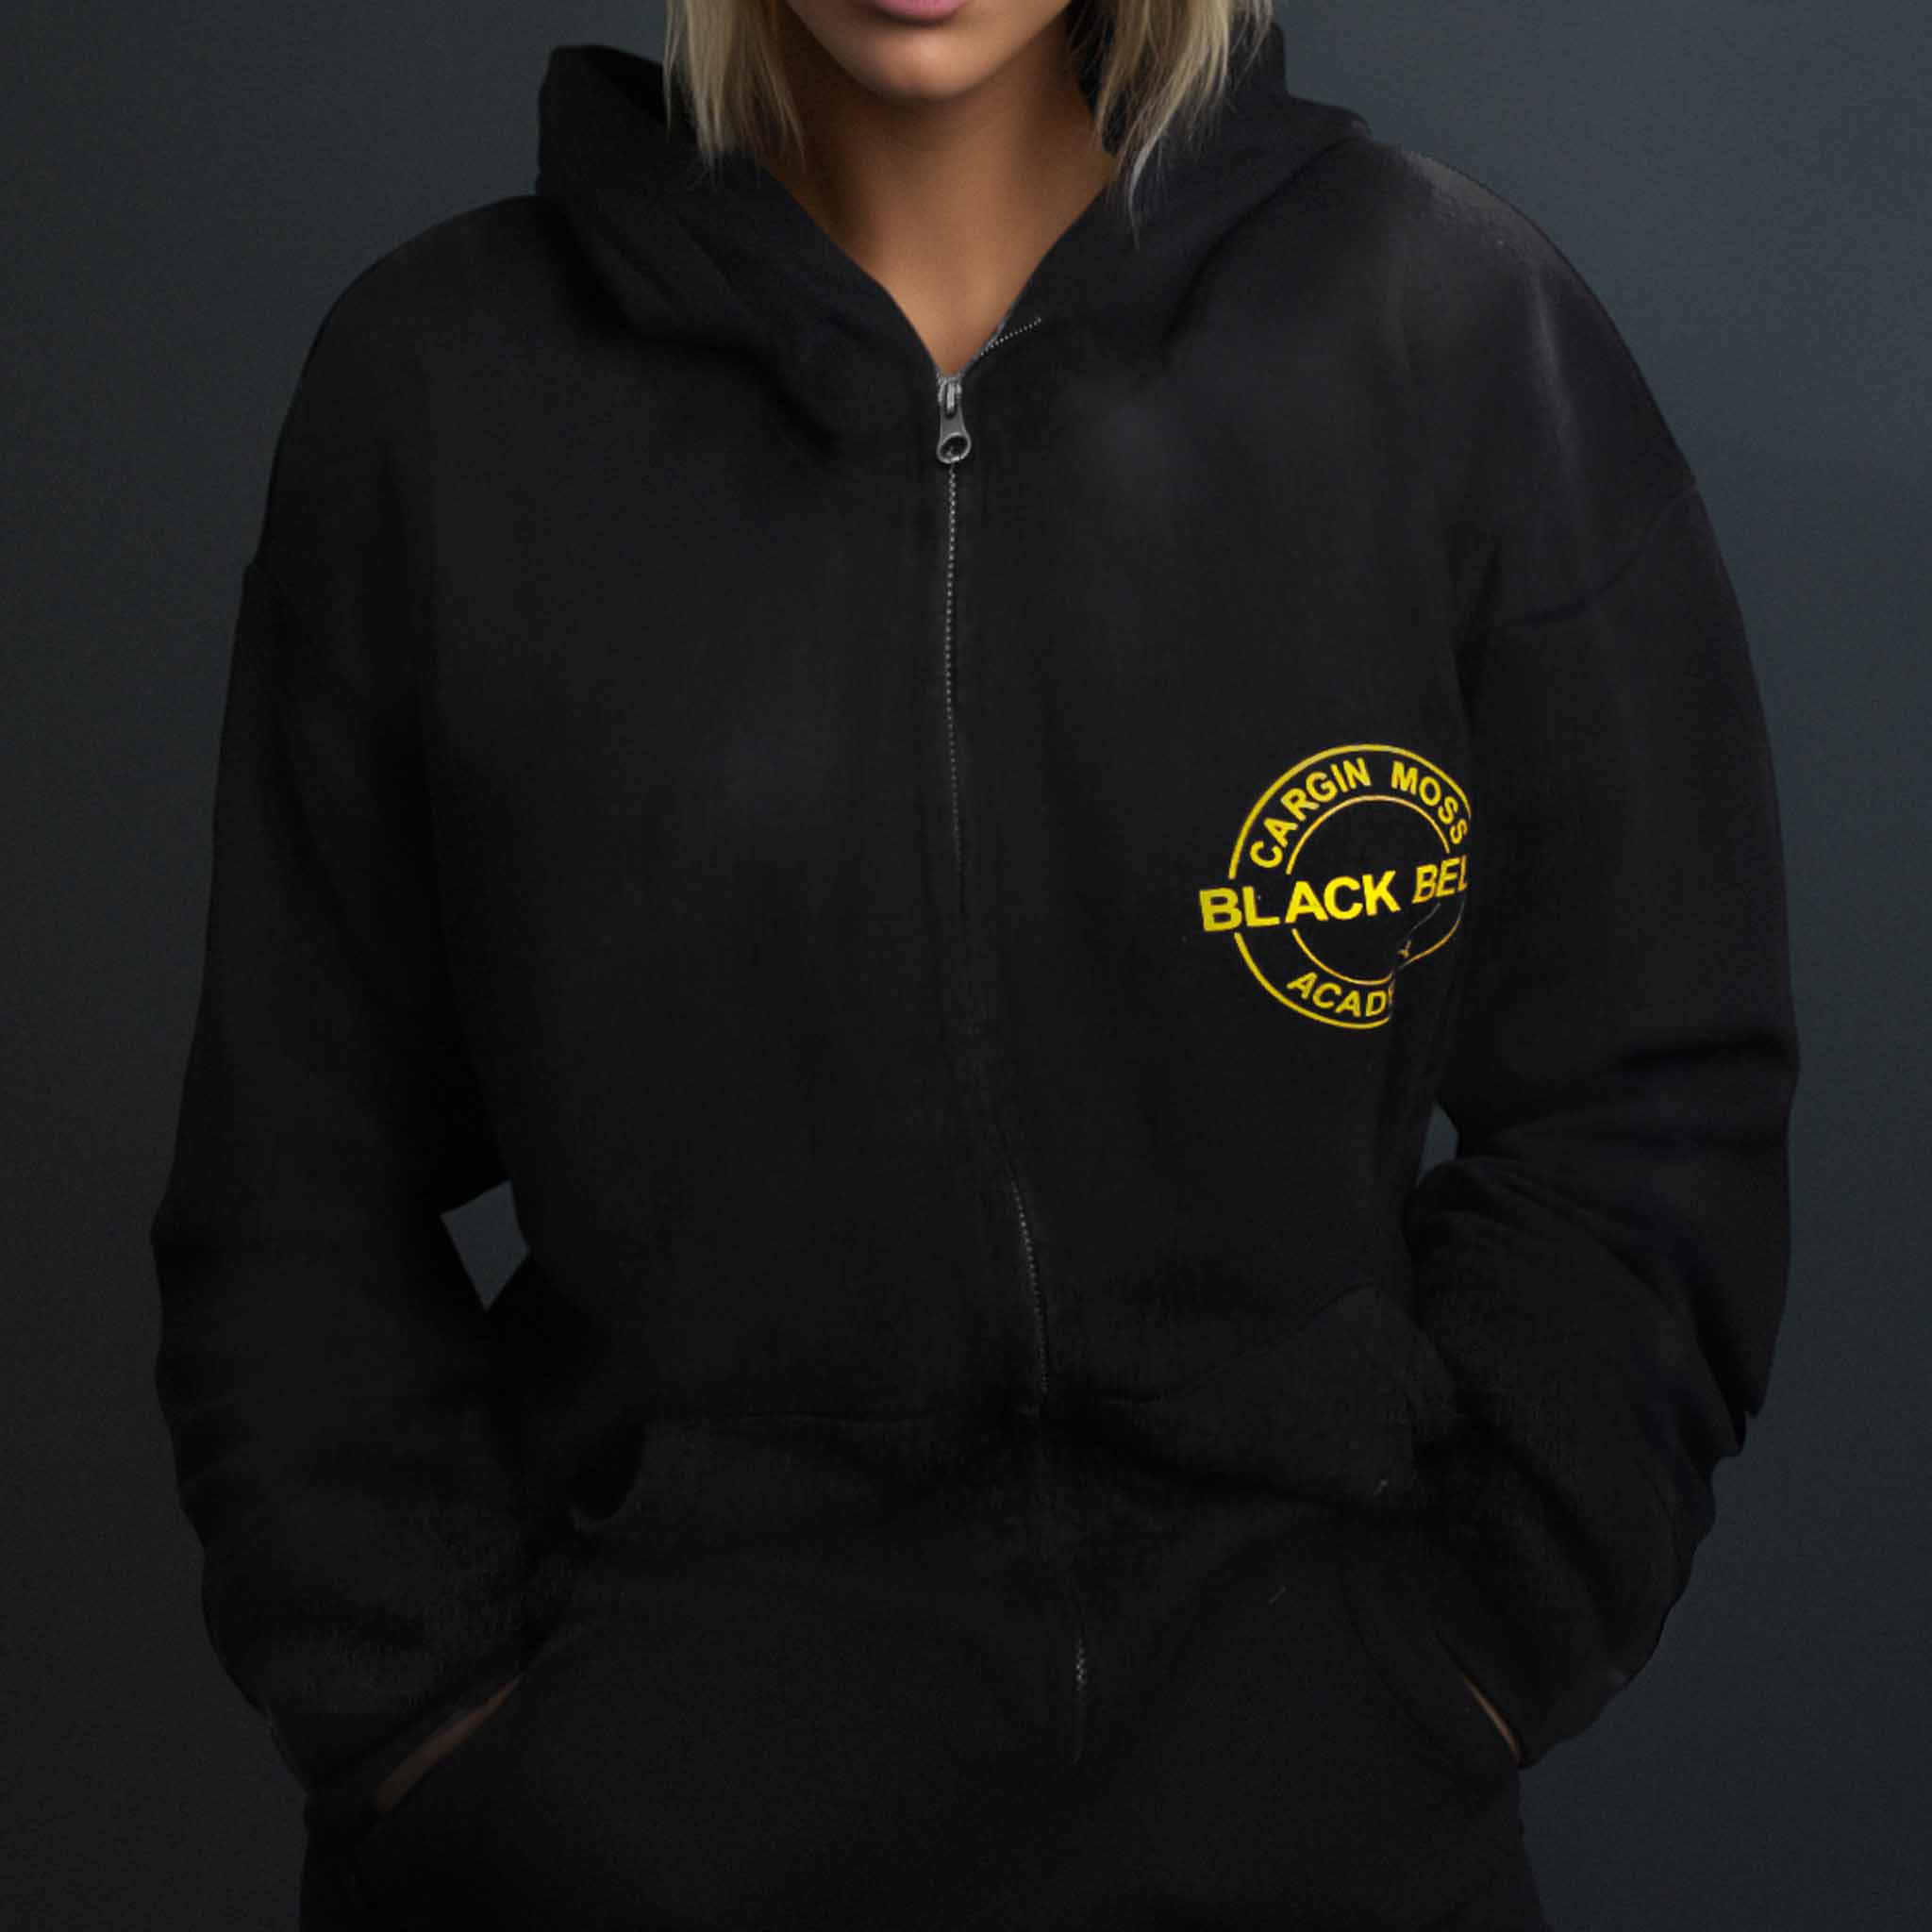 a cool black hoodie that shows that you support the CMBBA club for martial arts